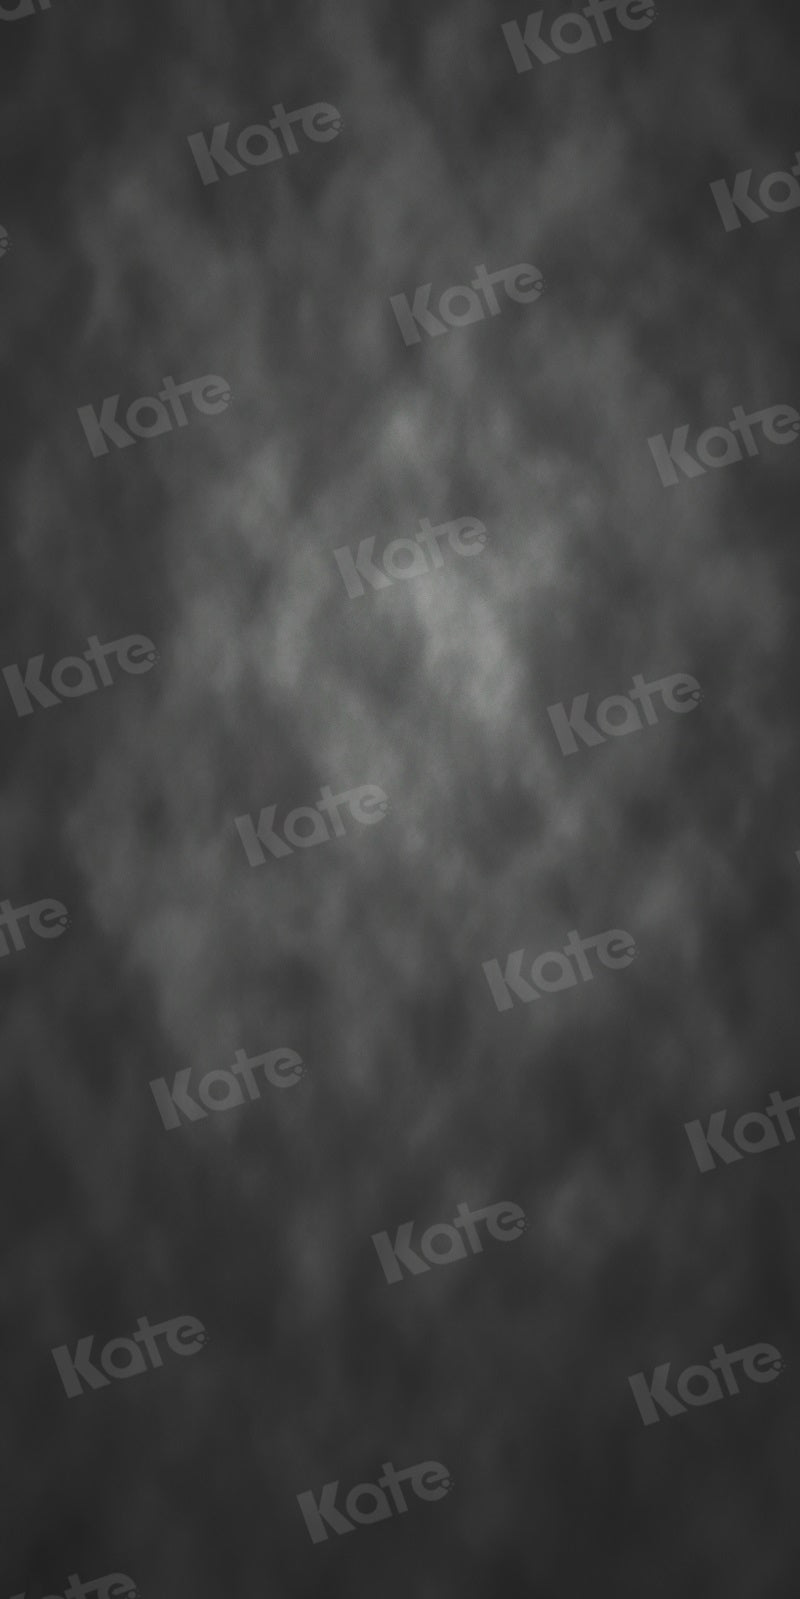 Kate Sweep Black Backdrop Abstract Texture for Photography